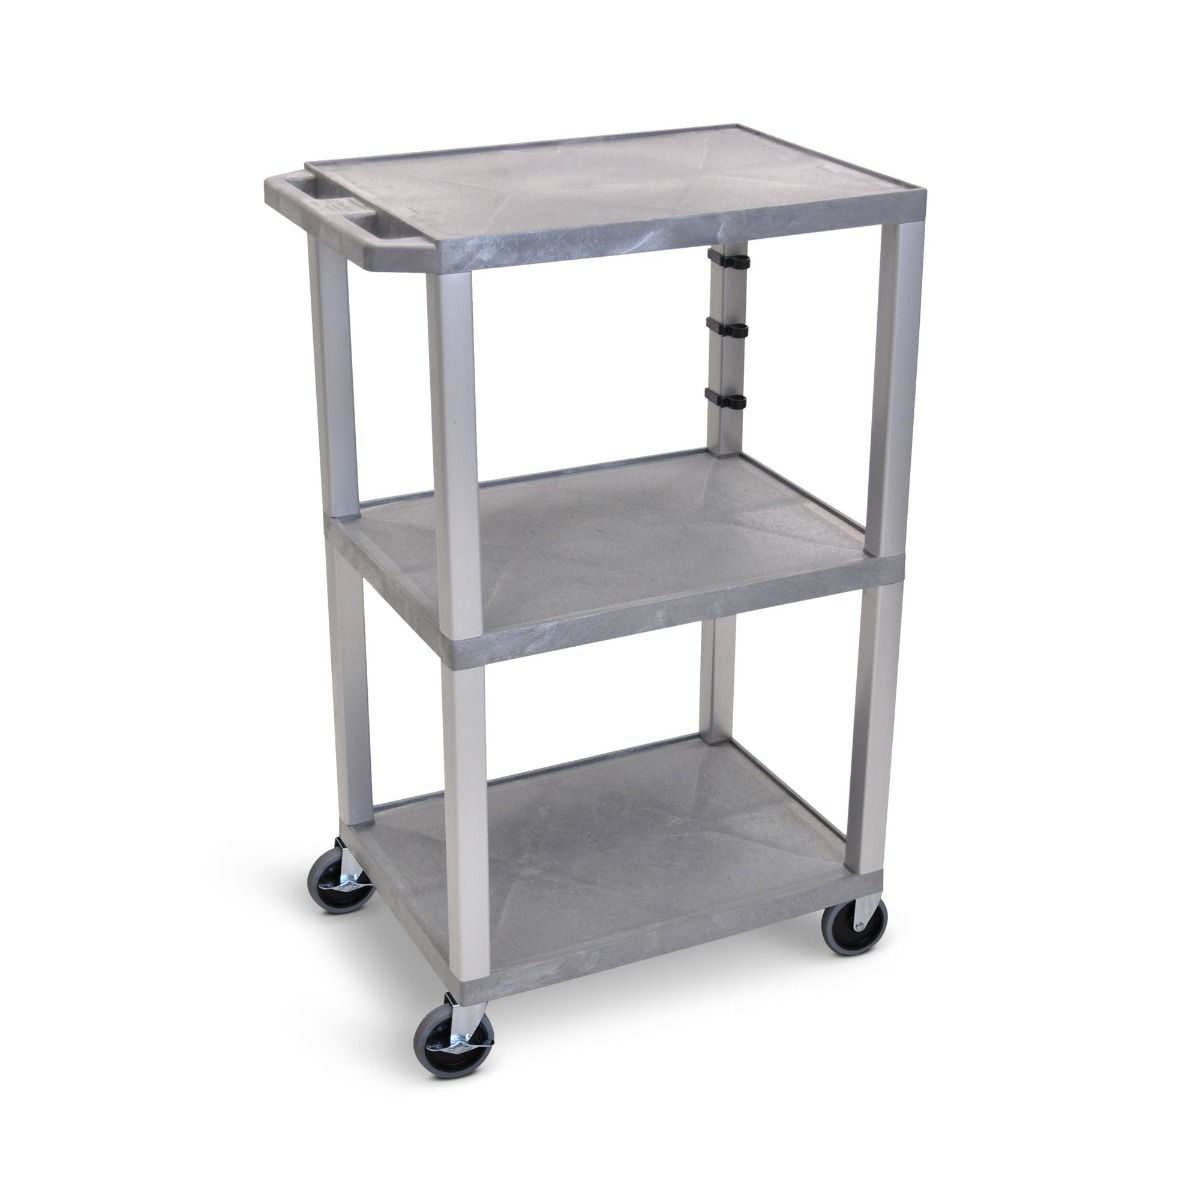 Luxor 42" High 3-Shelf Utility Cart [w/ 3-Outlet Electrical Assembly, Gray Shelves, Nickel Legs] - UCPL1GYE-N Image 1